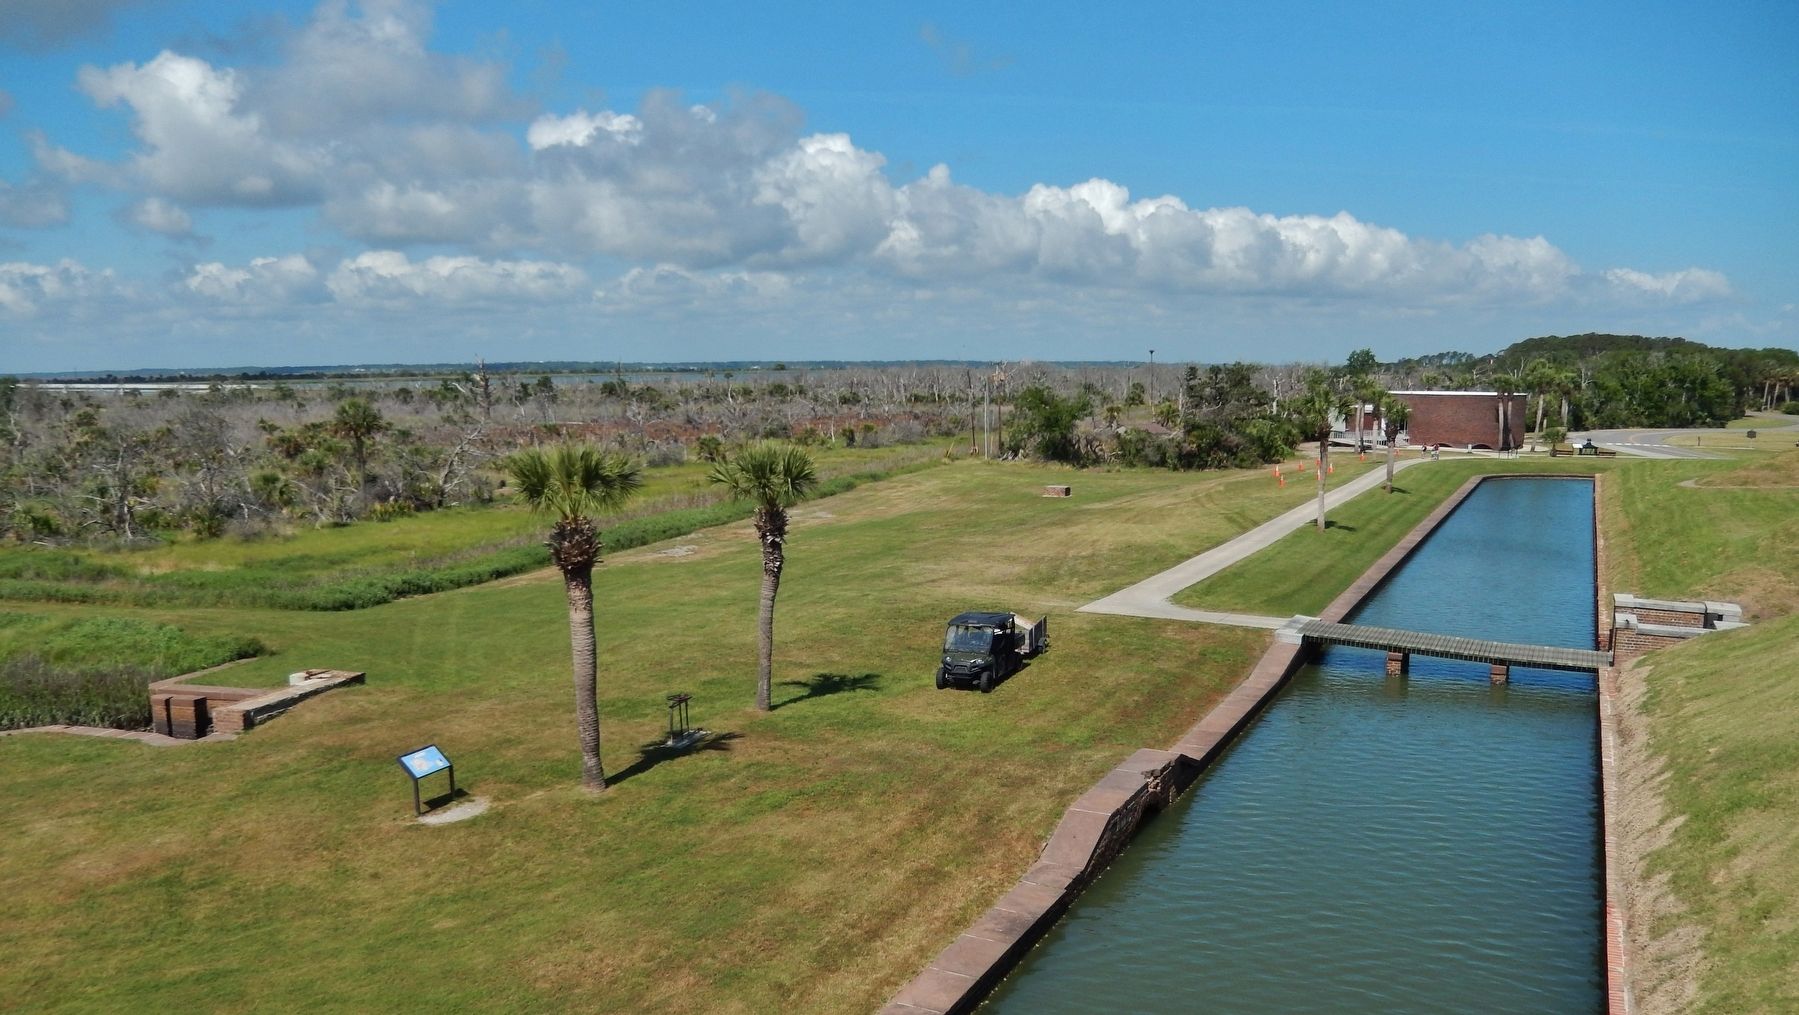 Moat Feeder Canal, Marker & Moat (<i>view looking southwest from atop fort rampart</i>) image. Click for full size.